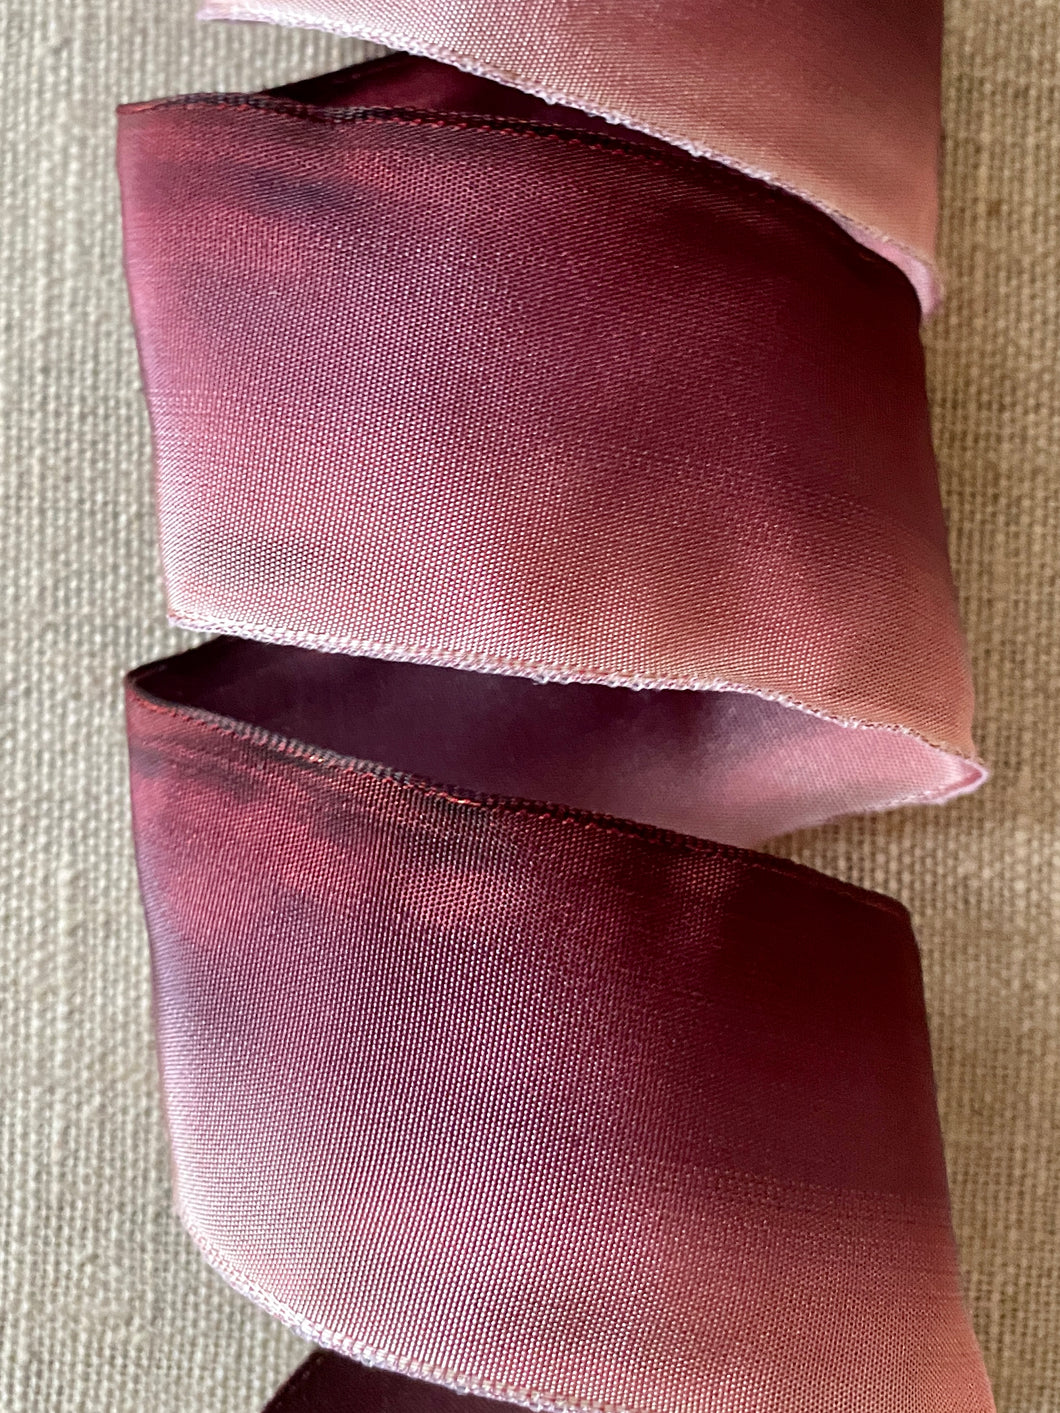 French Ombre Wired Ribbon Lavender Plum